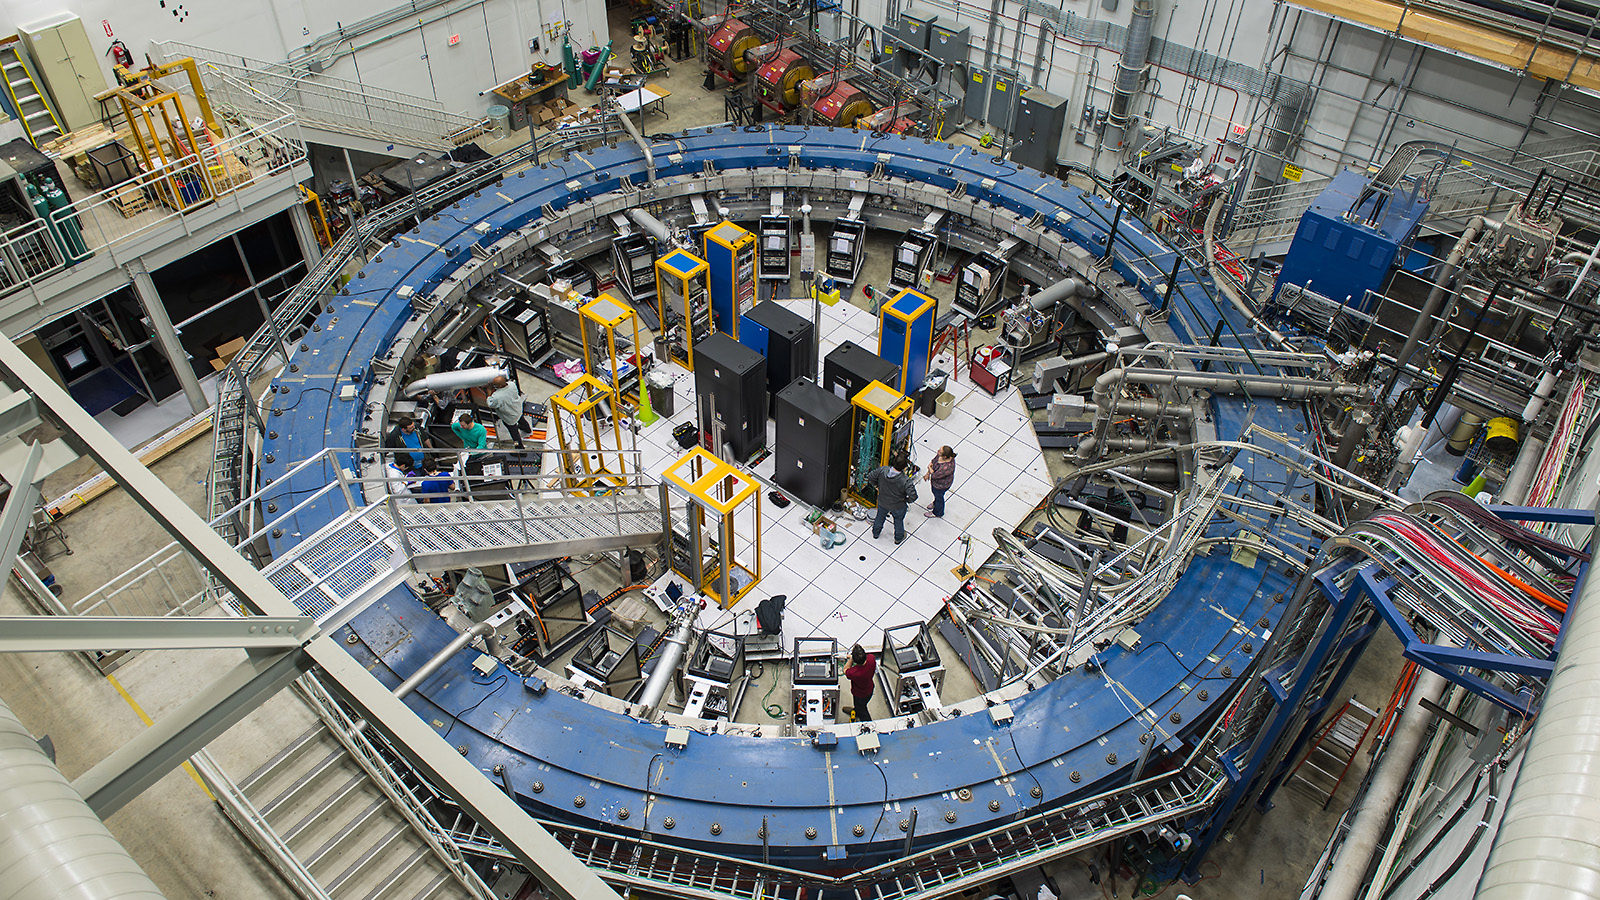 Overhead view of people working inside a room-sized blue ring, the Muon g-2 magnet